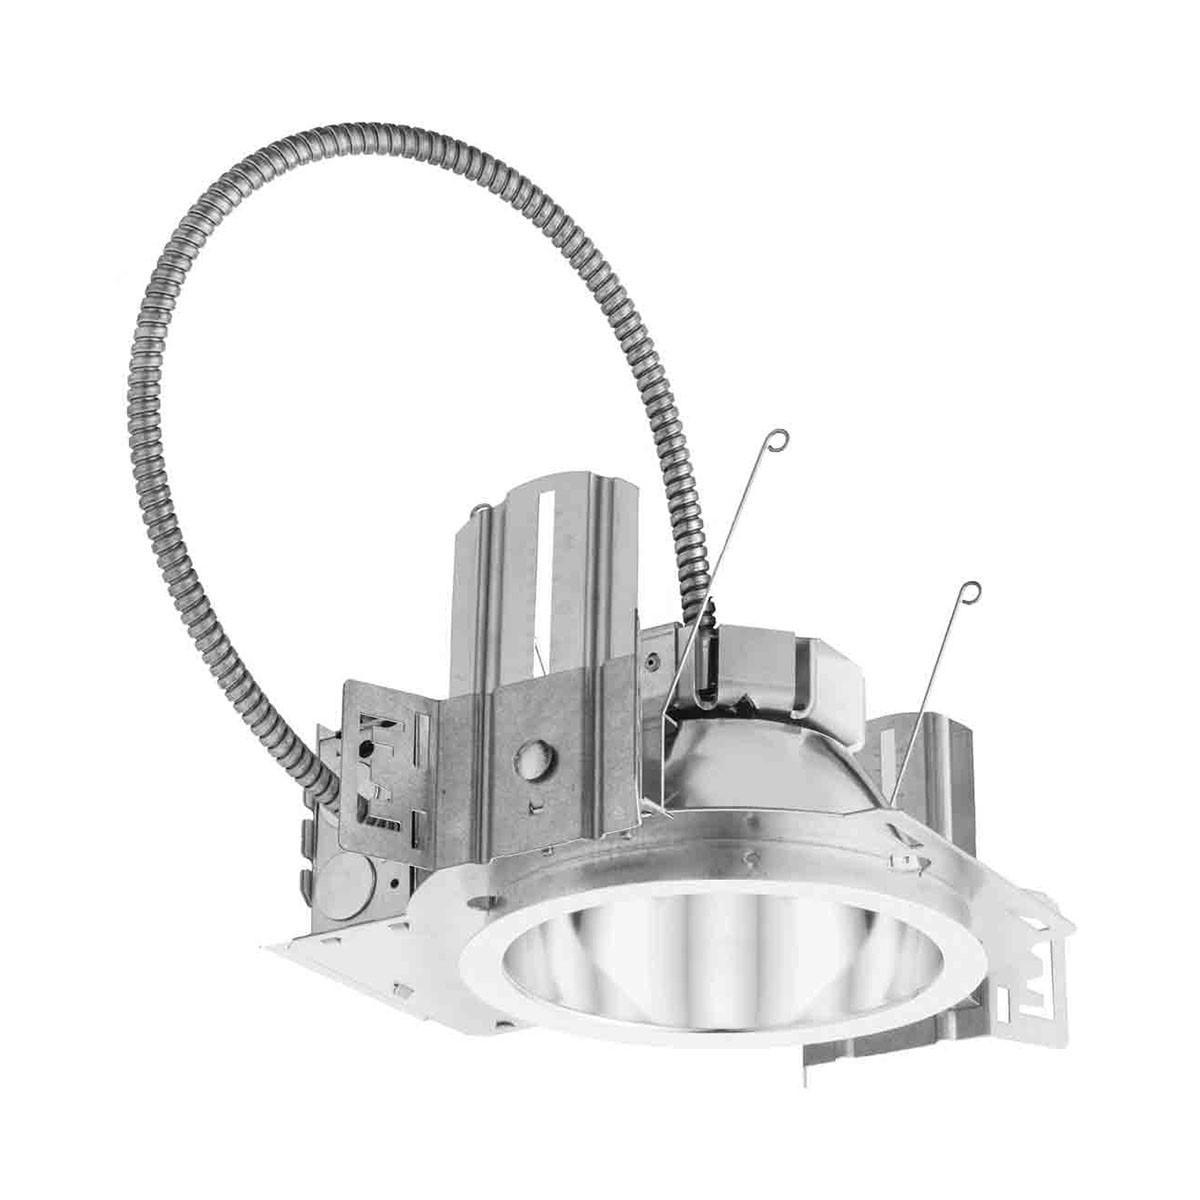 Lithonia LDN6 Commercial LED Recessed Downlight, 2000 lumens, 3500K (Reflector Sold Separately)